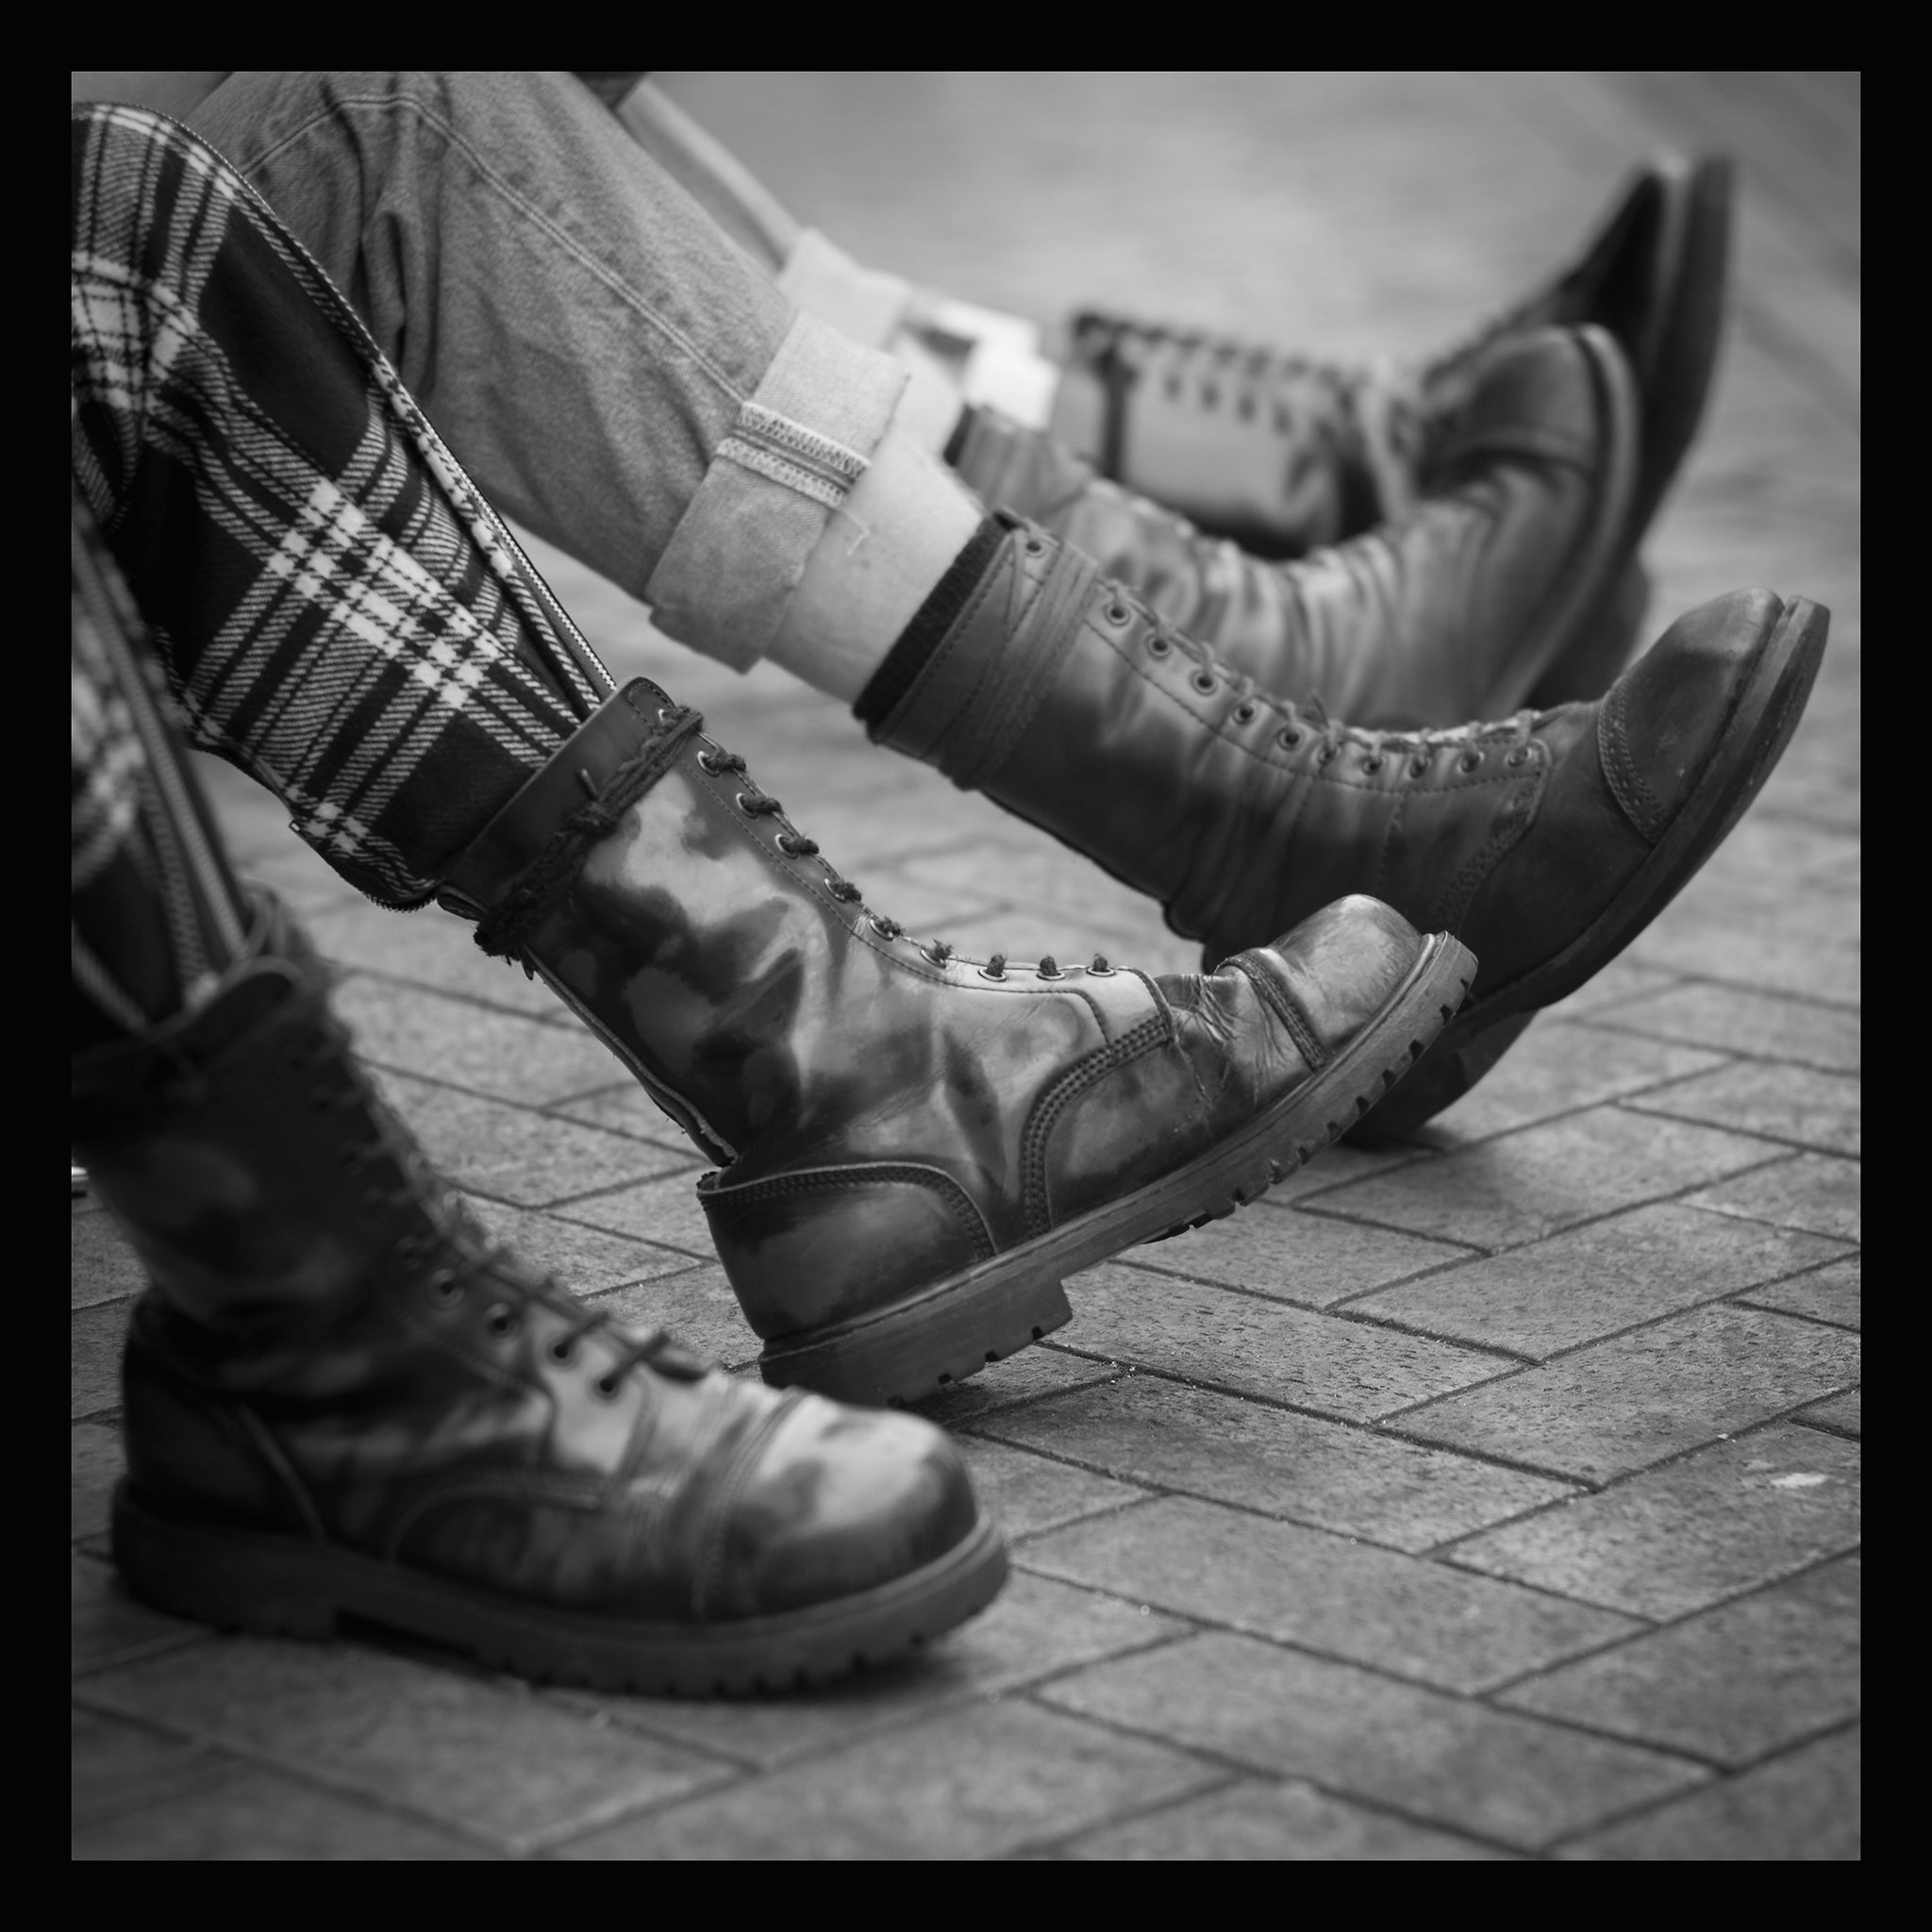 Punks show off the Doctor Marten boots as they gather in Blackpool for the annual Rebellion Punk Rock Festival